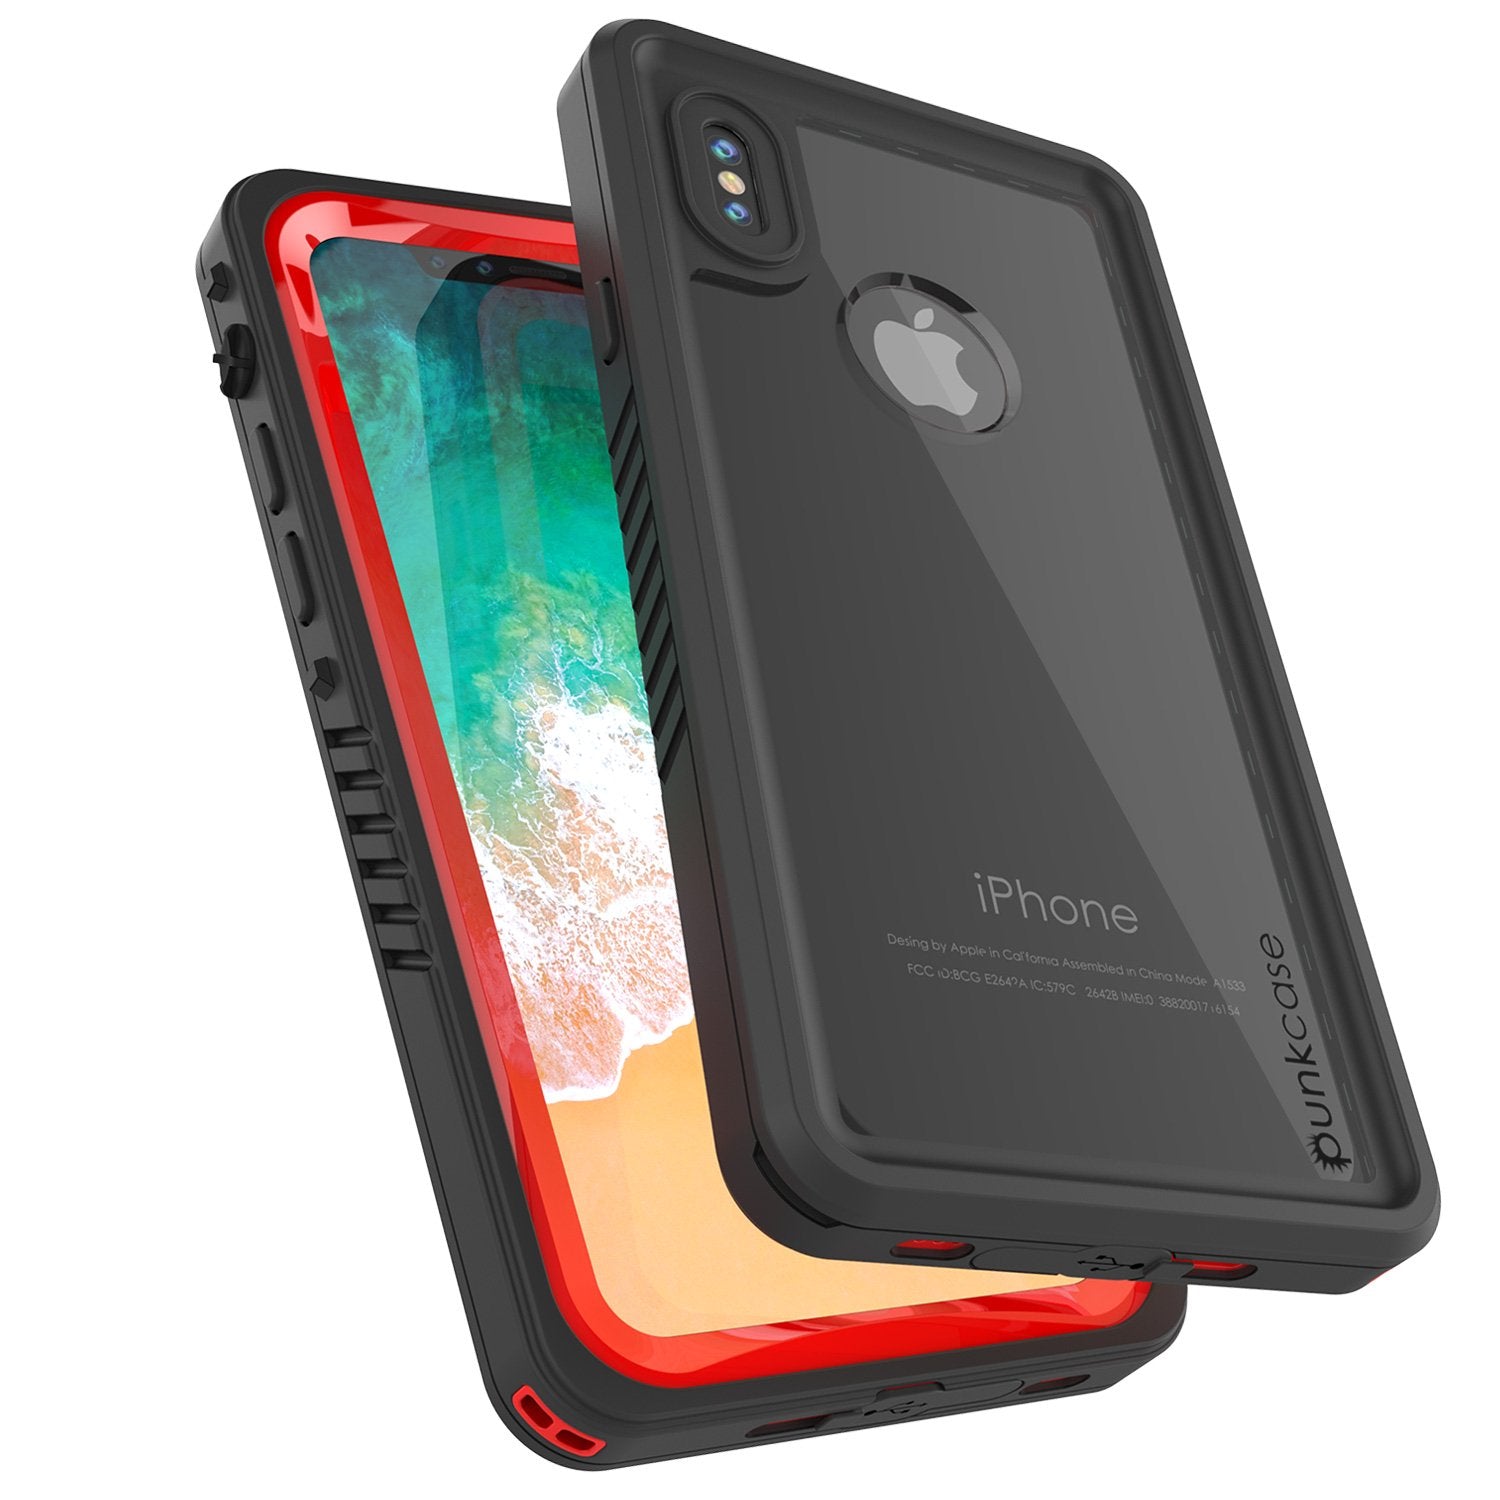 iPhone X Case, Punkcase [Extreme Series] [Slim Fit] [IP68 Certified] [Shockproof] [Snowproof] [Dirproof] Armor Cover W/ Built In Screen Protector for Apple iPhone 10 [Red]